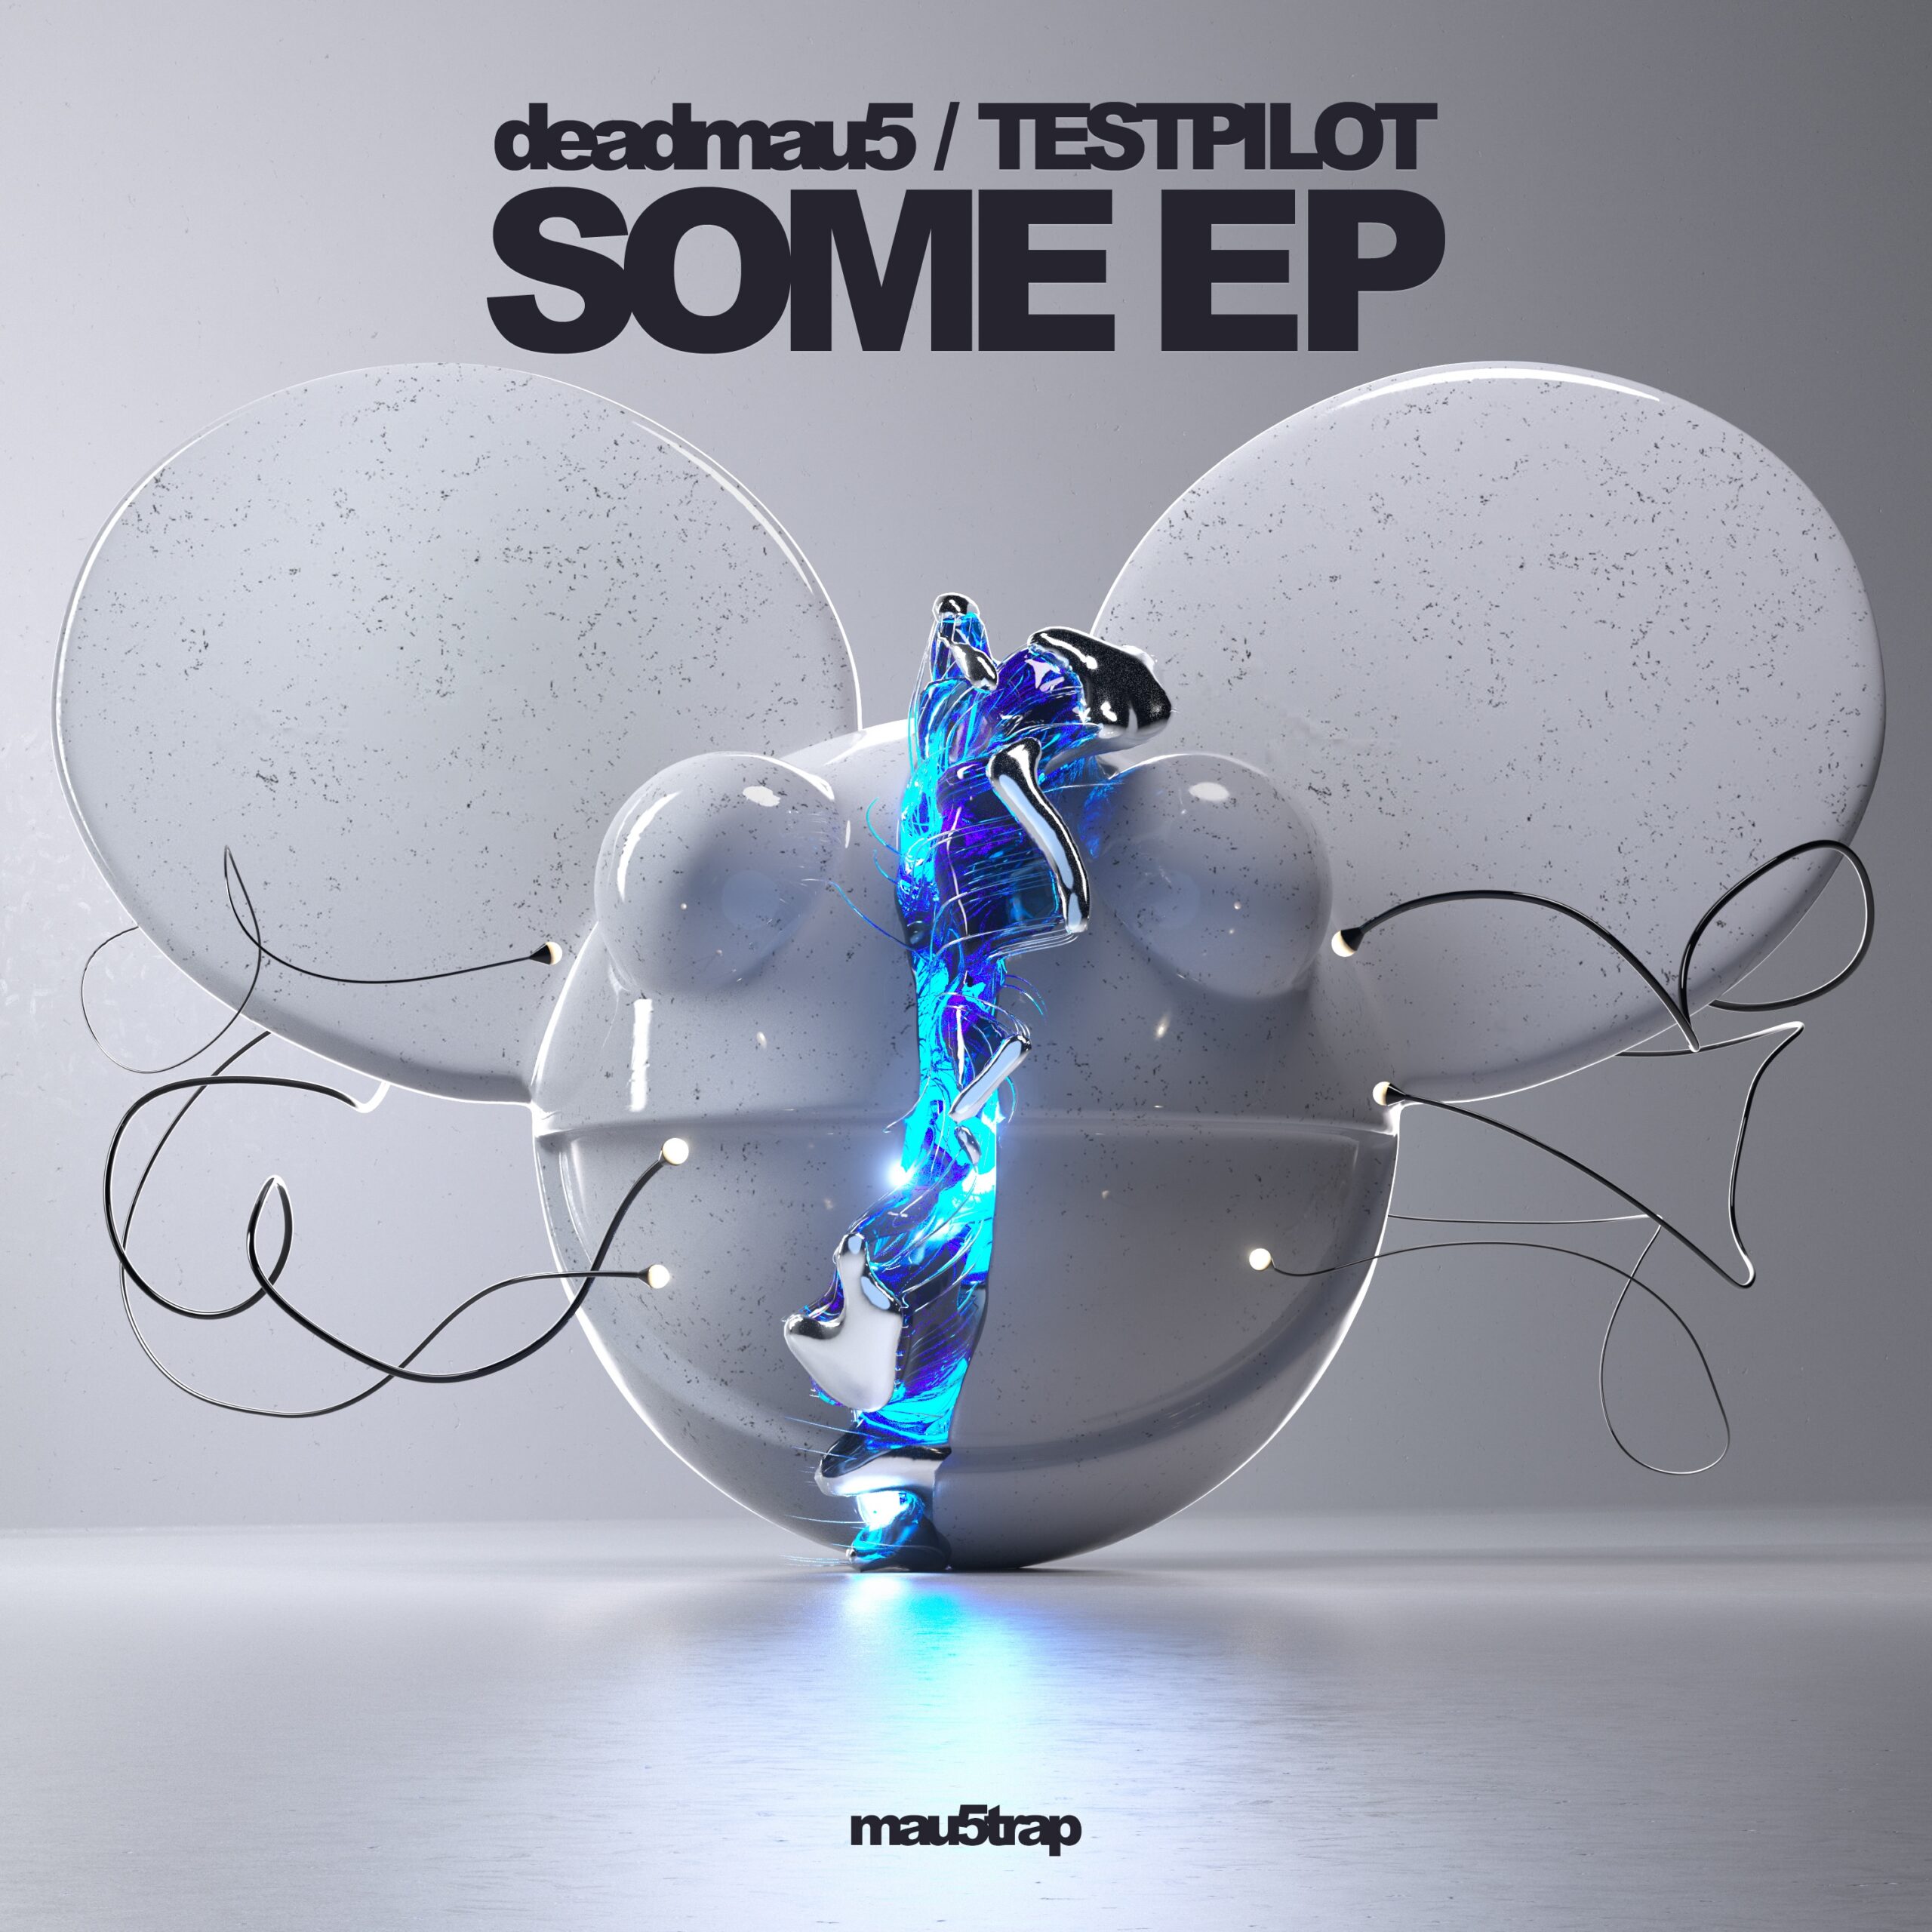 deadmau5 ‘some ep’ OUT TODAY, JULY 19 ON mau5trap